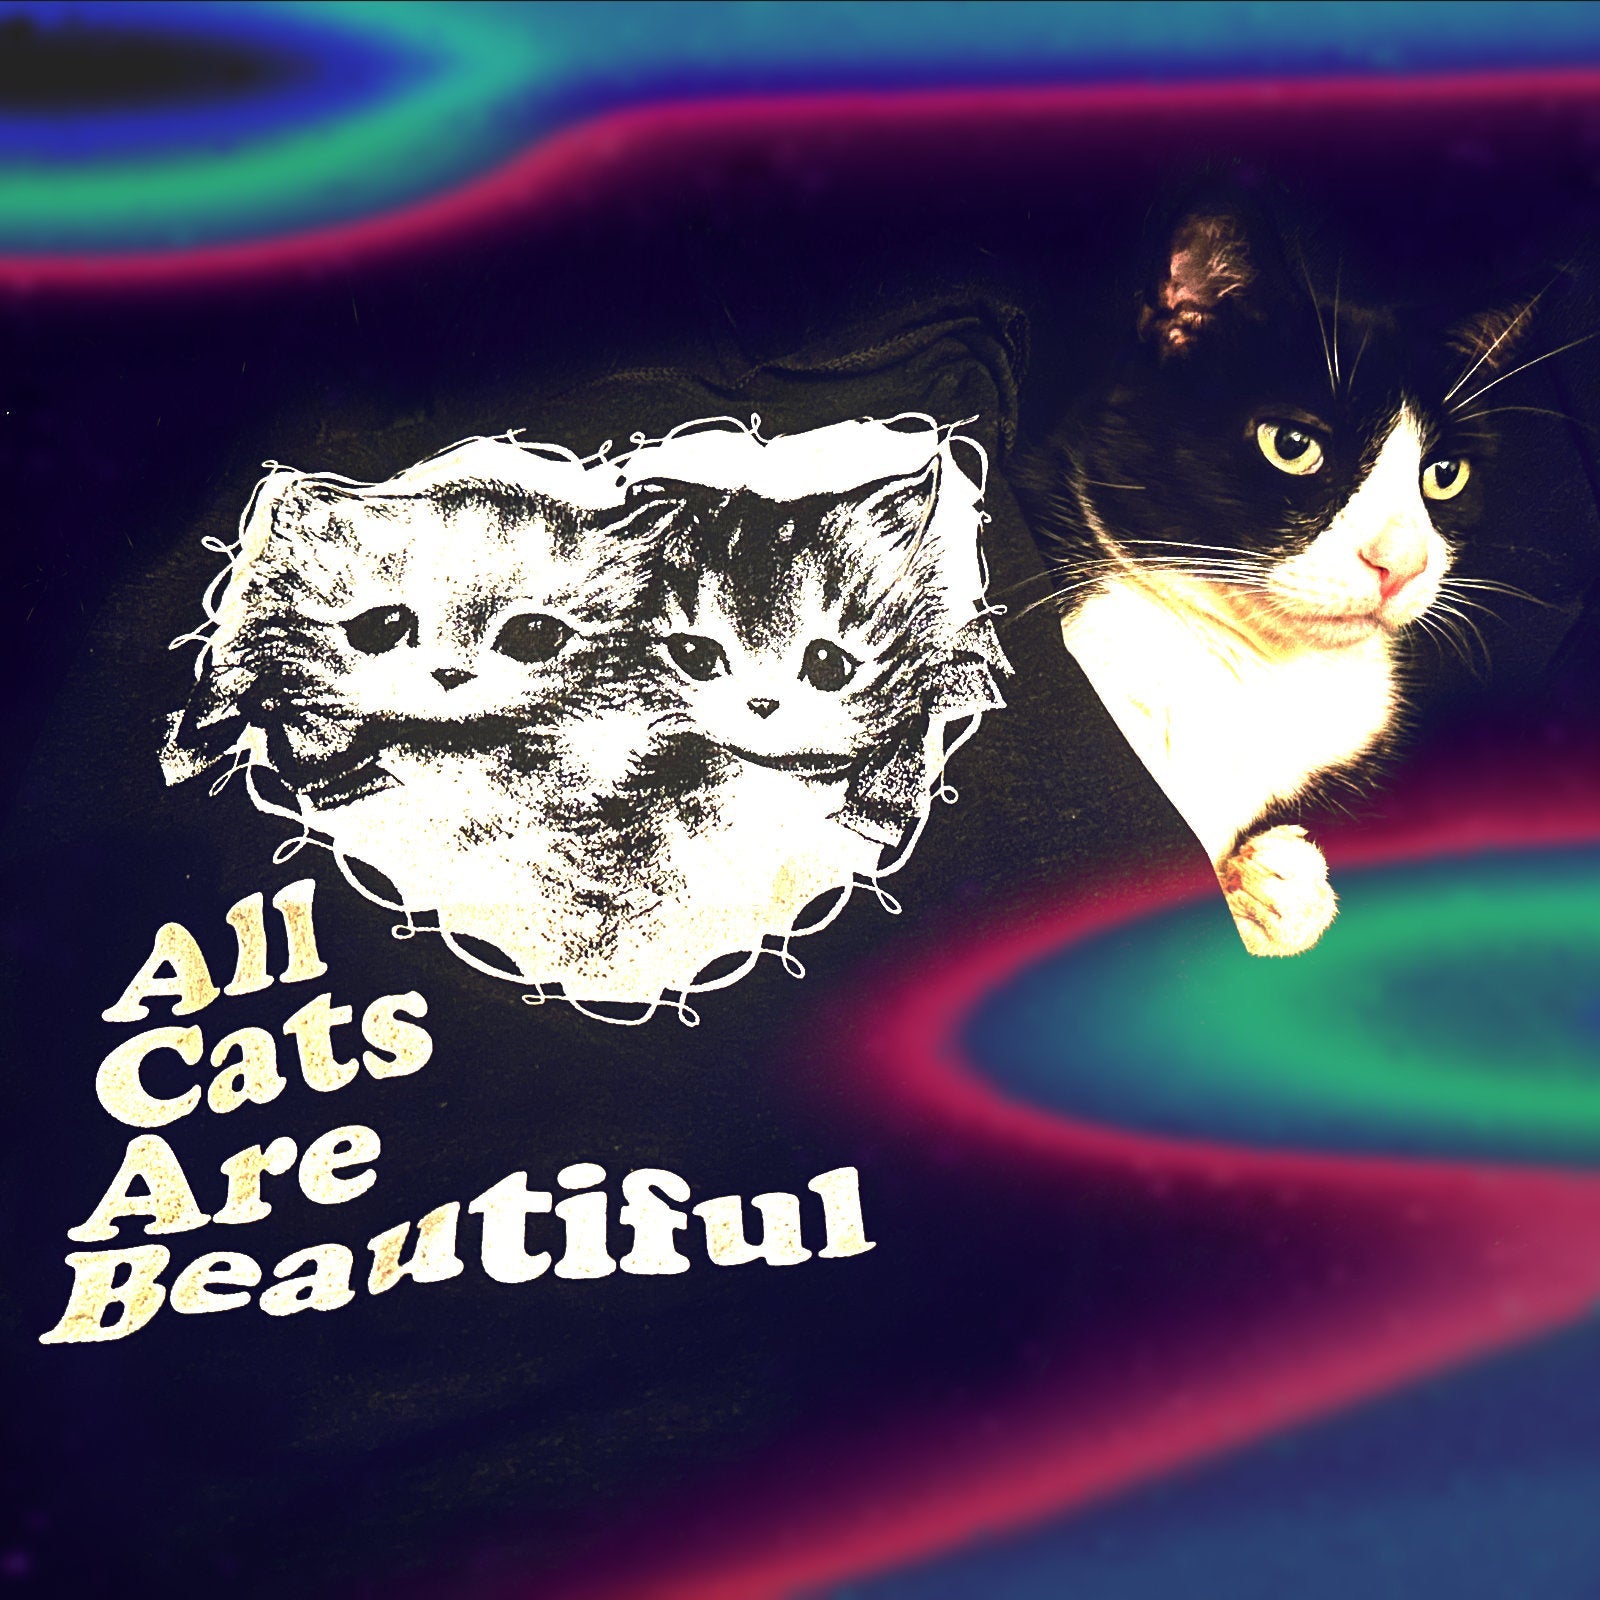 All Cats Are Beautiful Hoodie